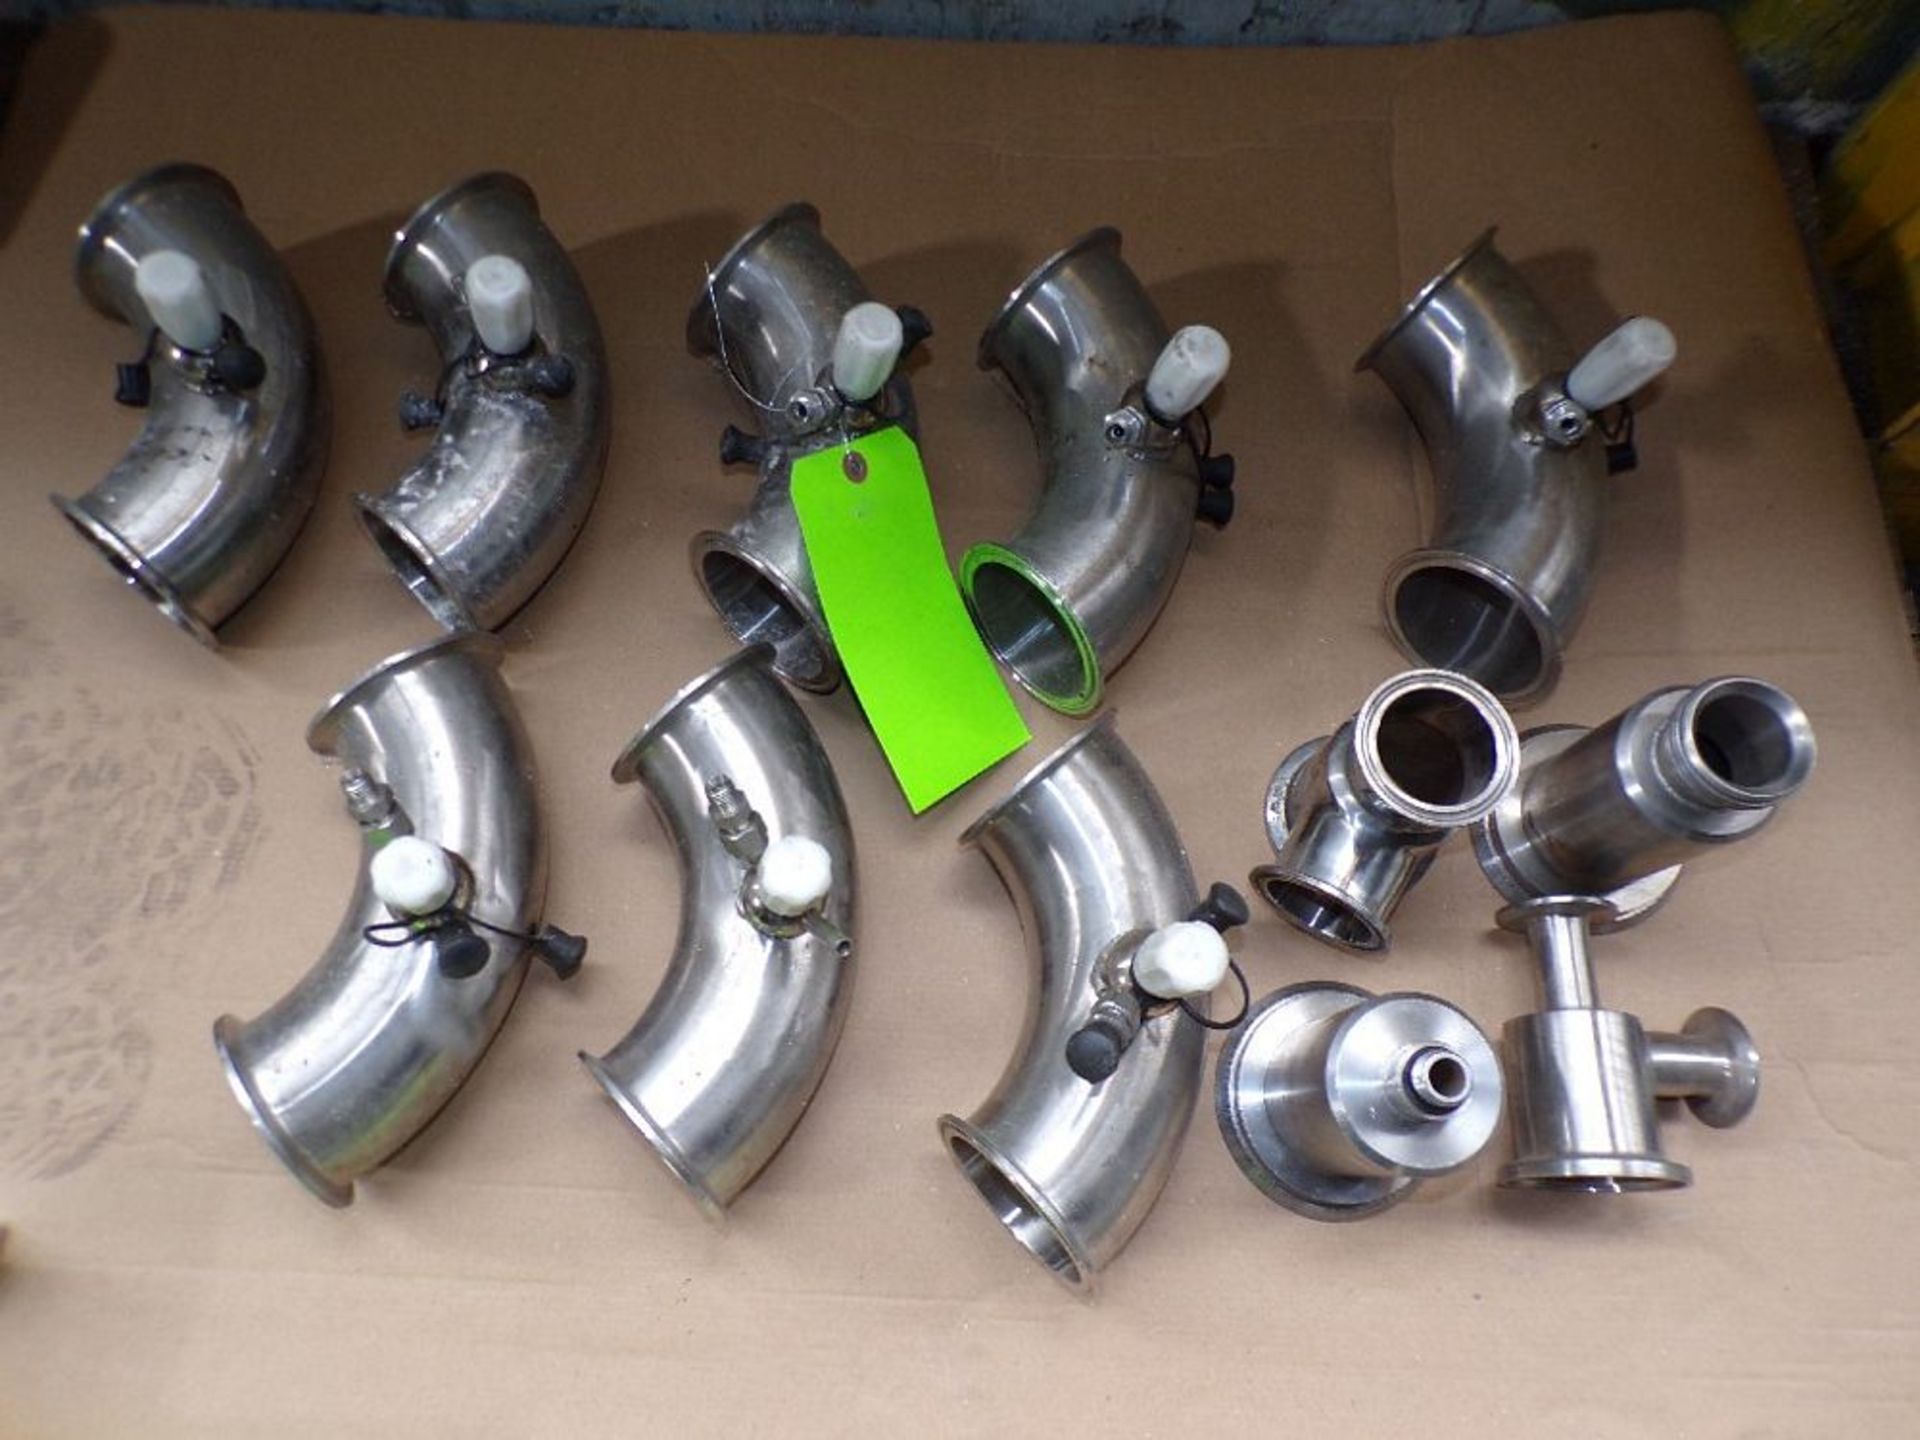 Qty (12) 3 inch sanitary stainless elbows with relief valves; (2) 3 inch valve bodies; (1) 2 inch